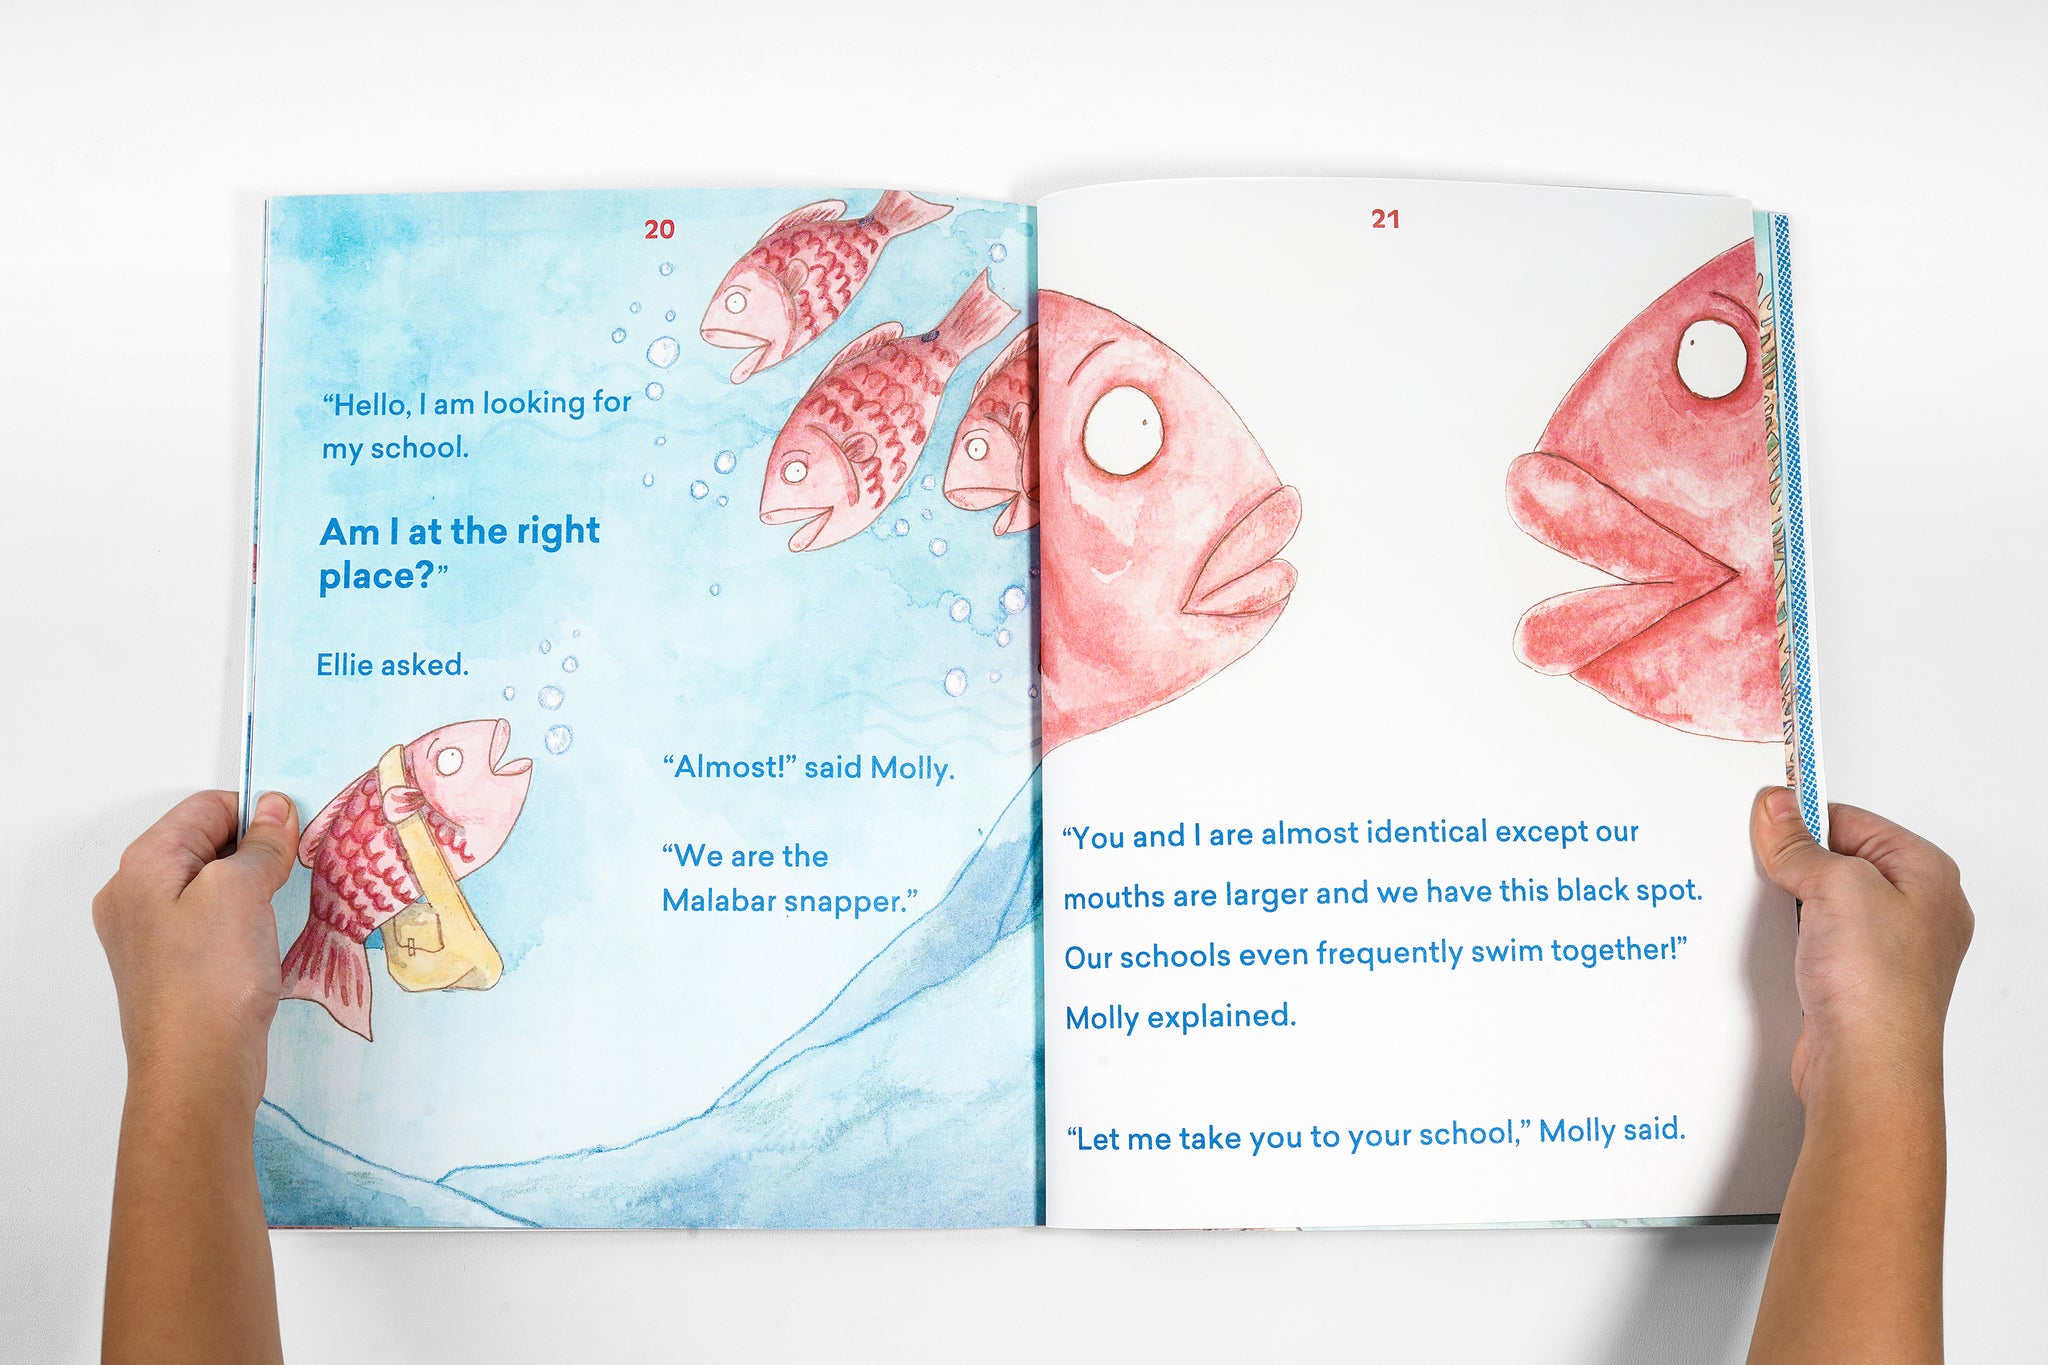 A Snapper Tale from Elle Wibisono published by Binatang Press